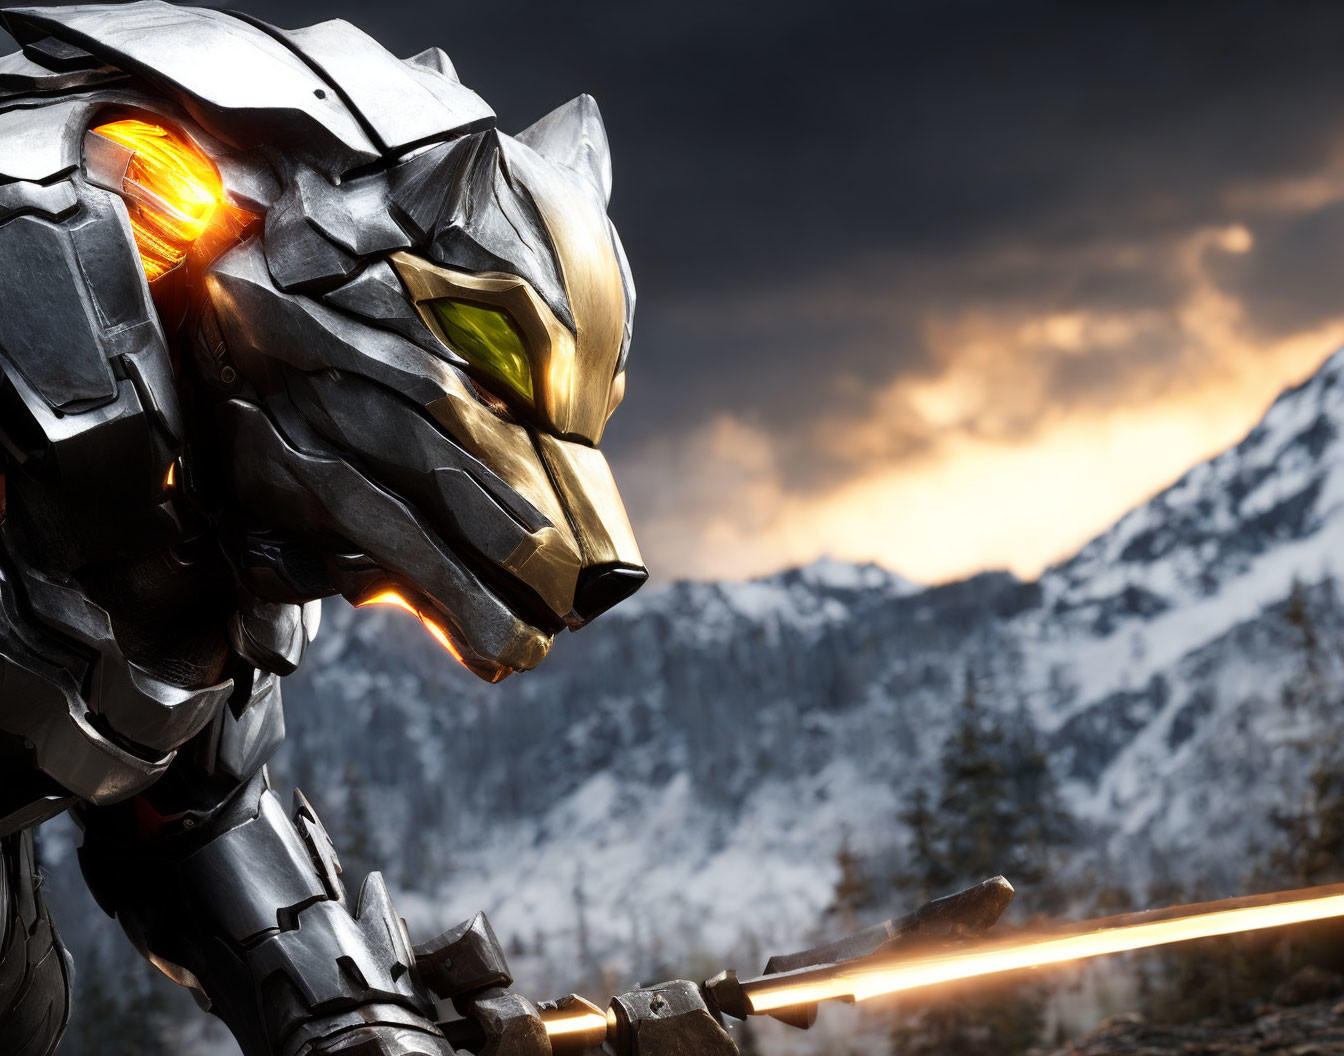 Metallic wolf-like robot with glowing eyes against snowy mountain backdrop